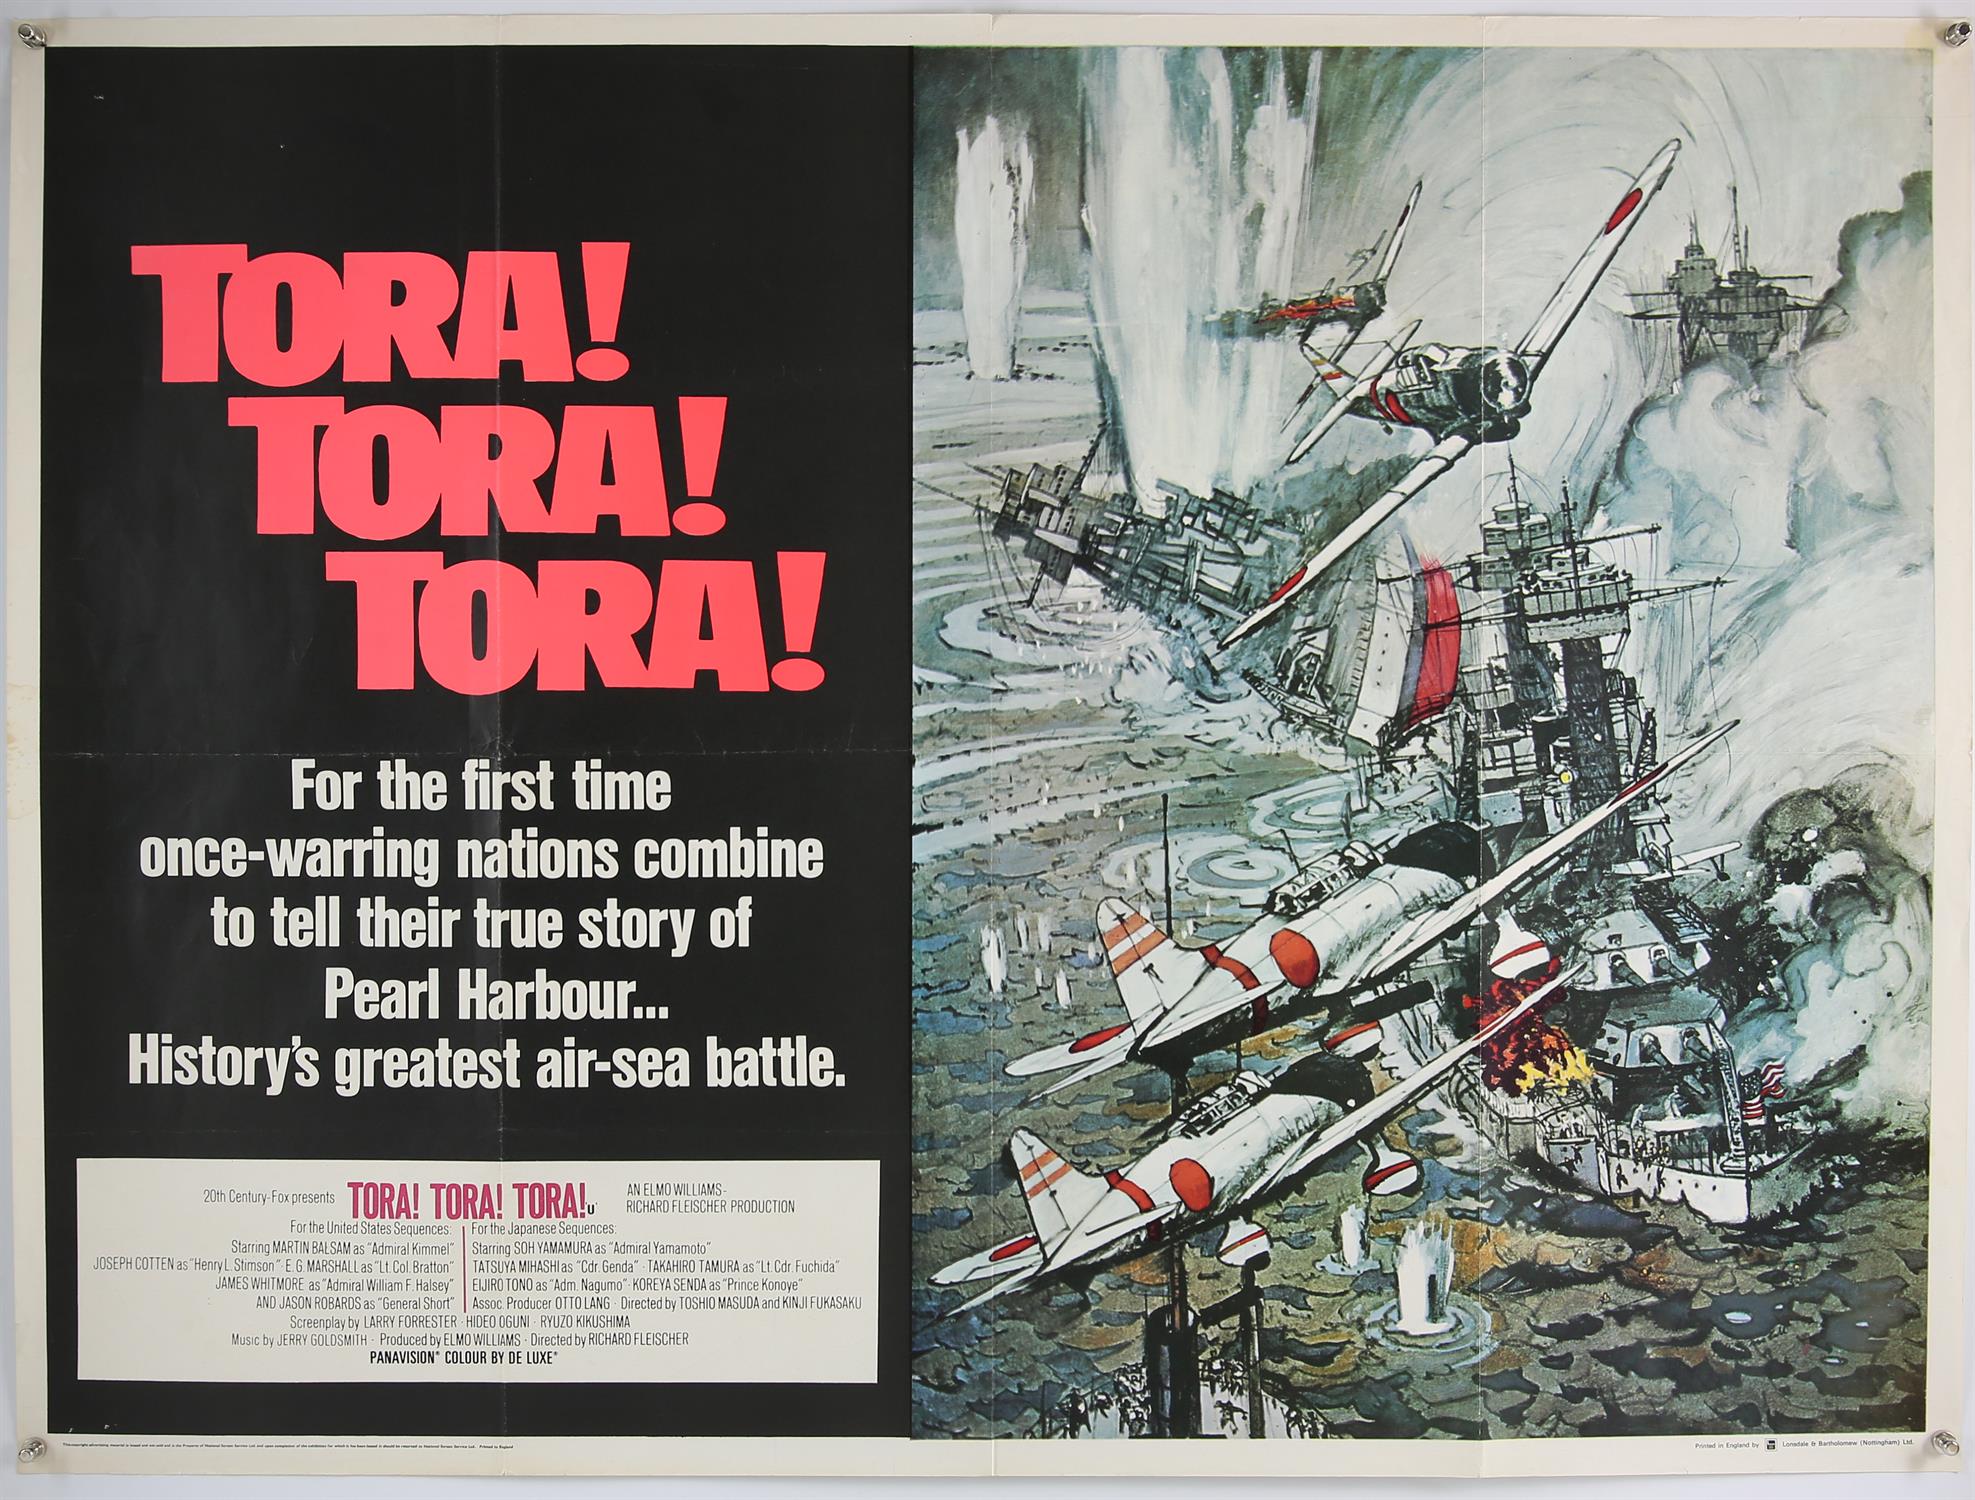 Four British Quad film posters for The Heroes of Telemark, Tora Tora Tora, Tobruk and Hell Below